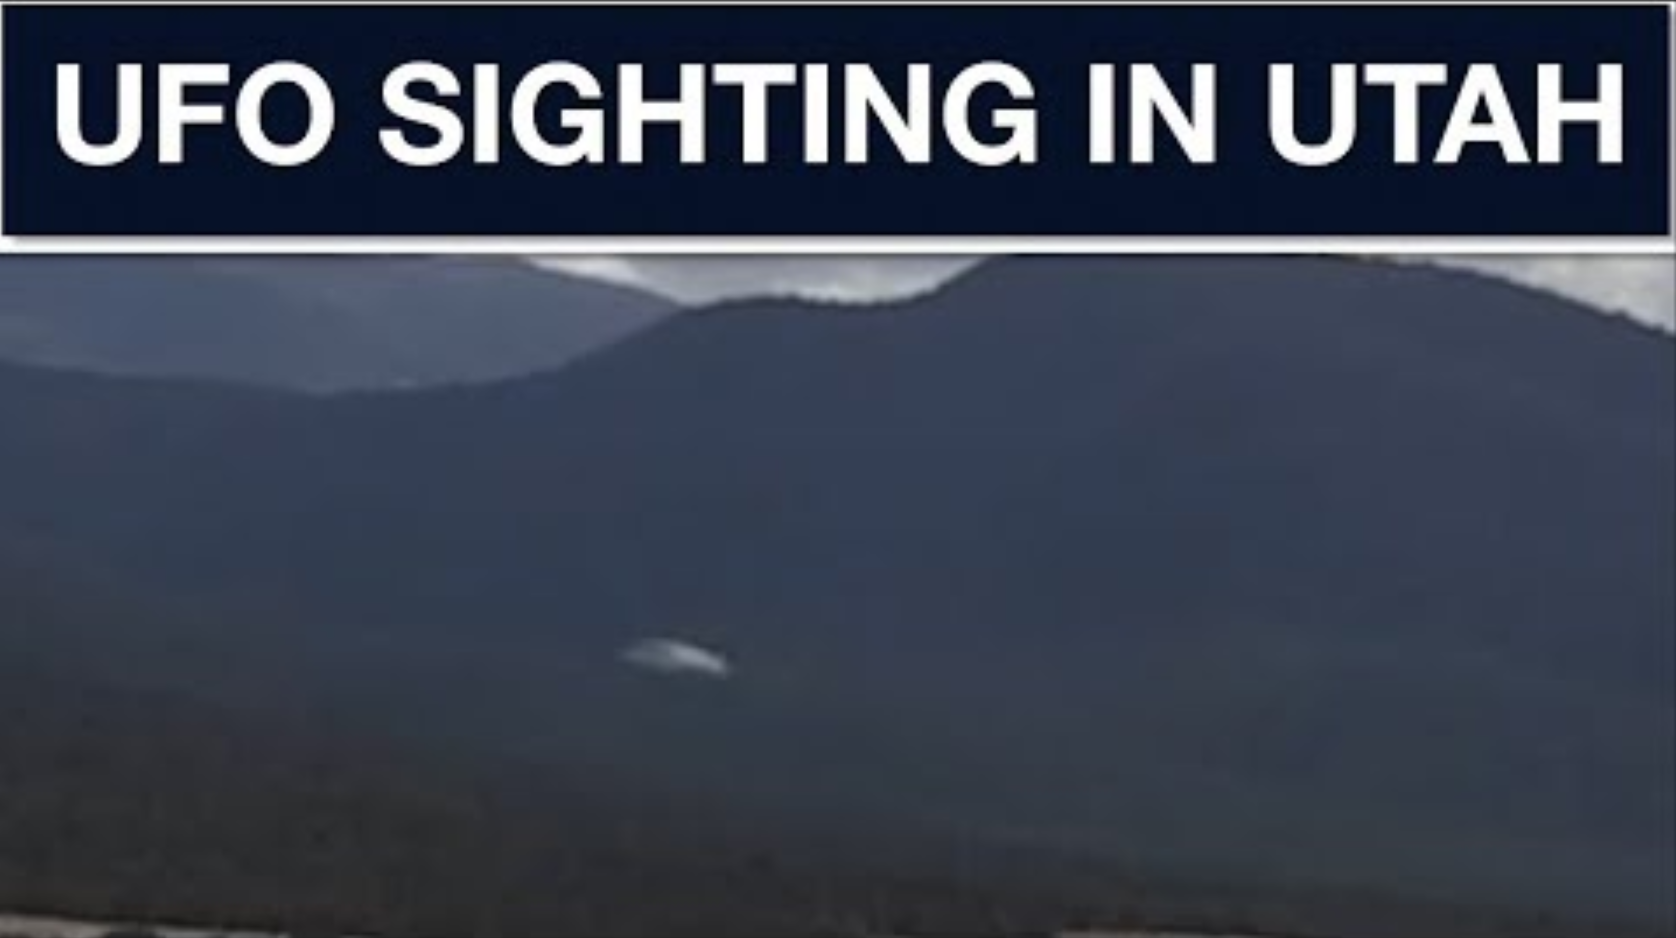 UFO Sighting Caught on Camera, New Footage Reveals — Excellent UFO Example to Share With Friends